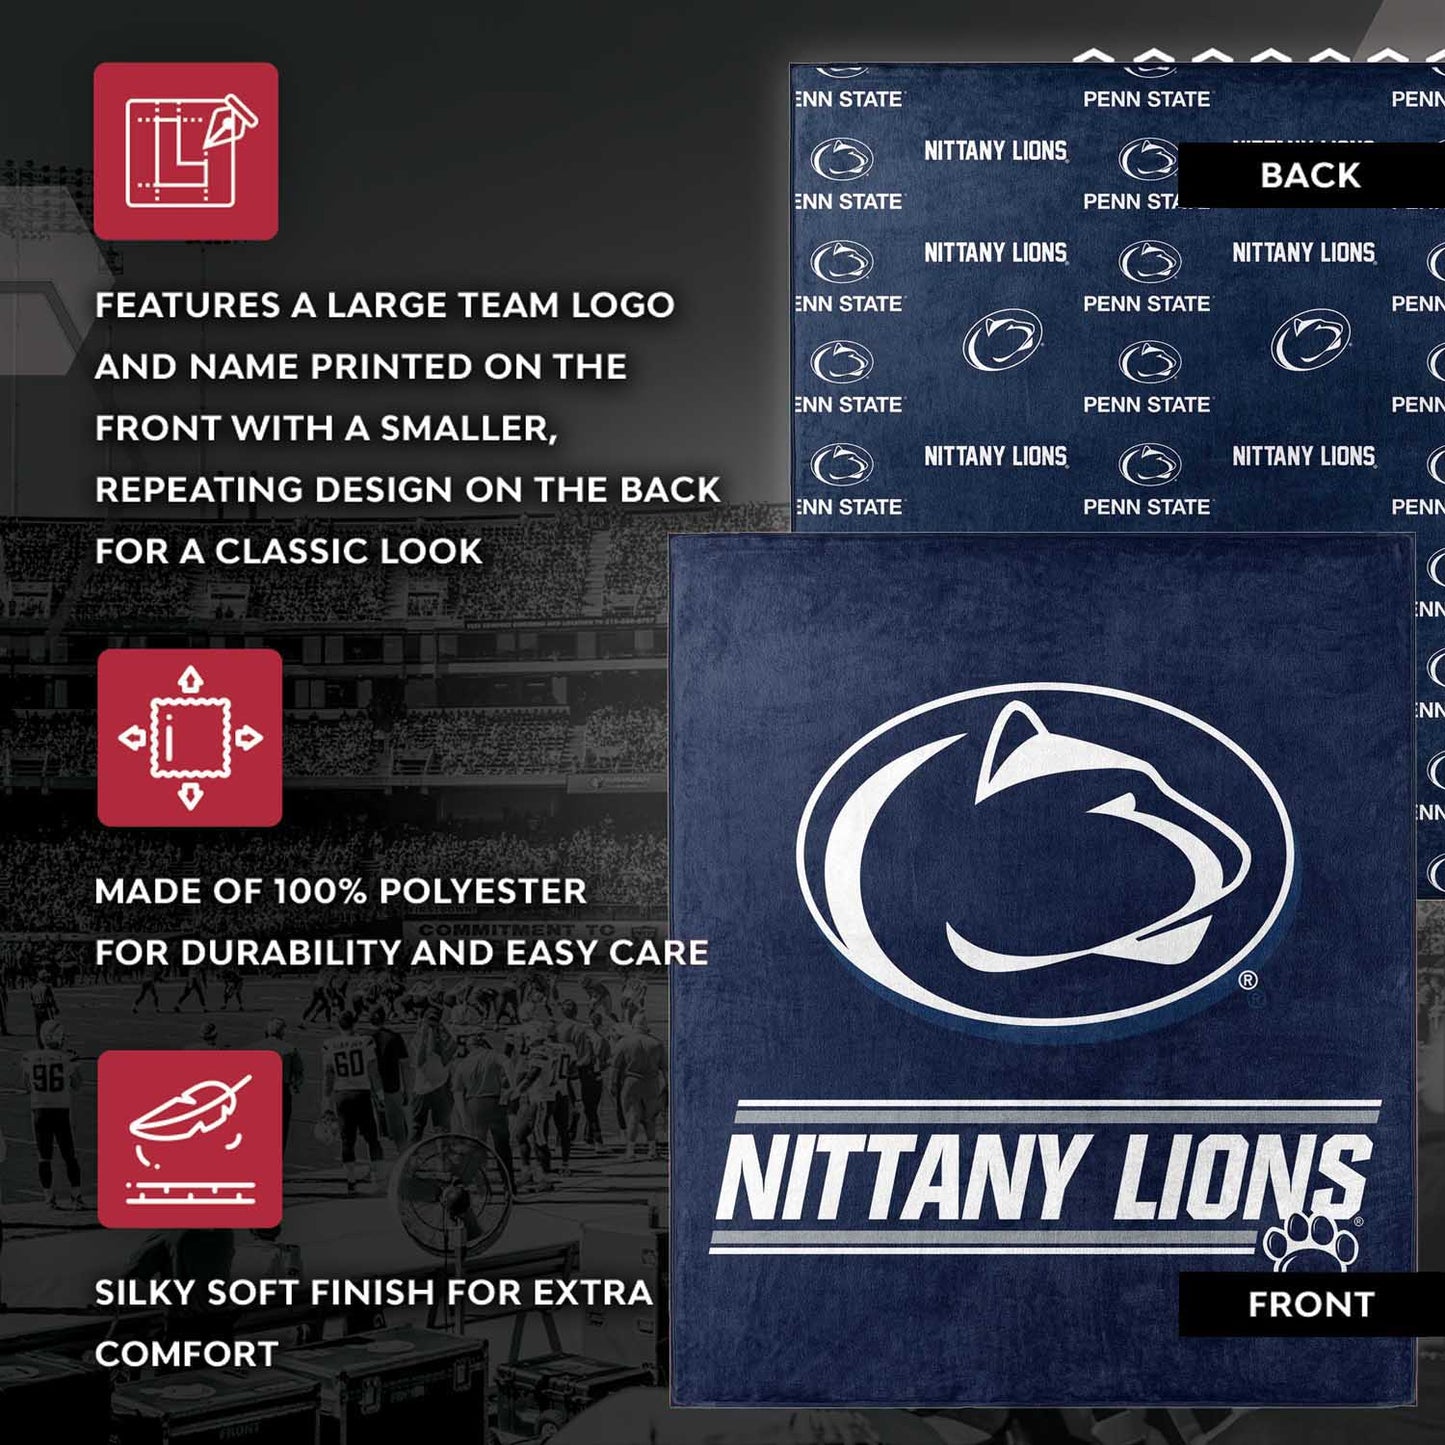 Penn State Nittany Lions NCAA Double Sided Blanket - Navy